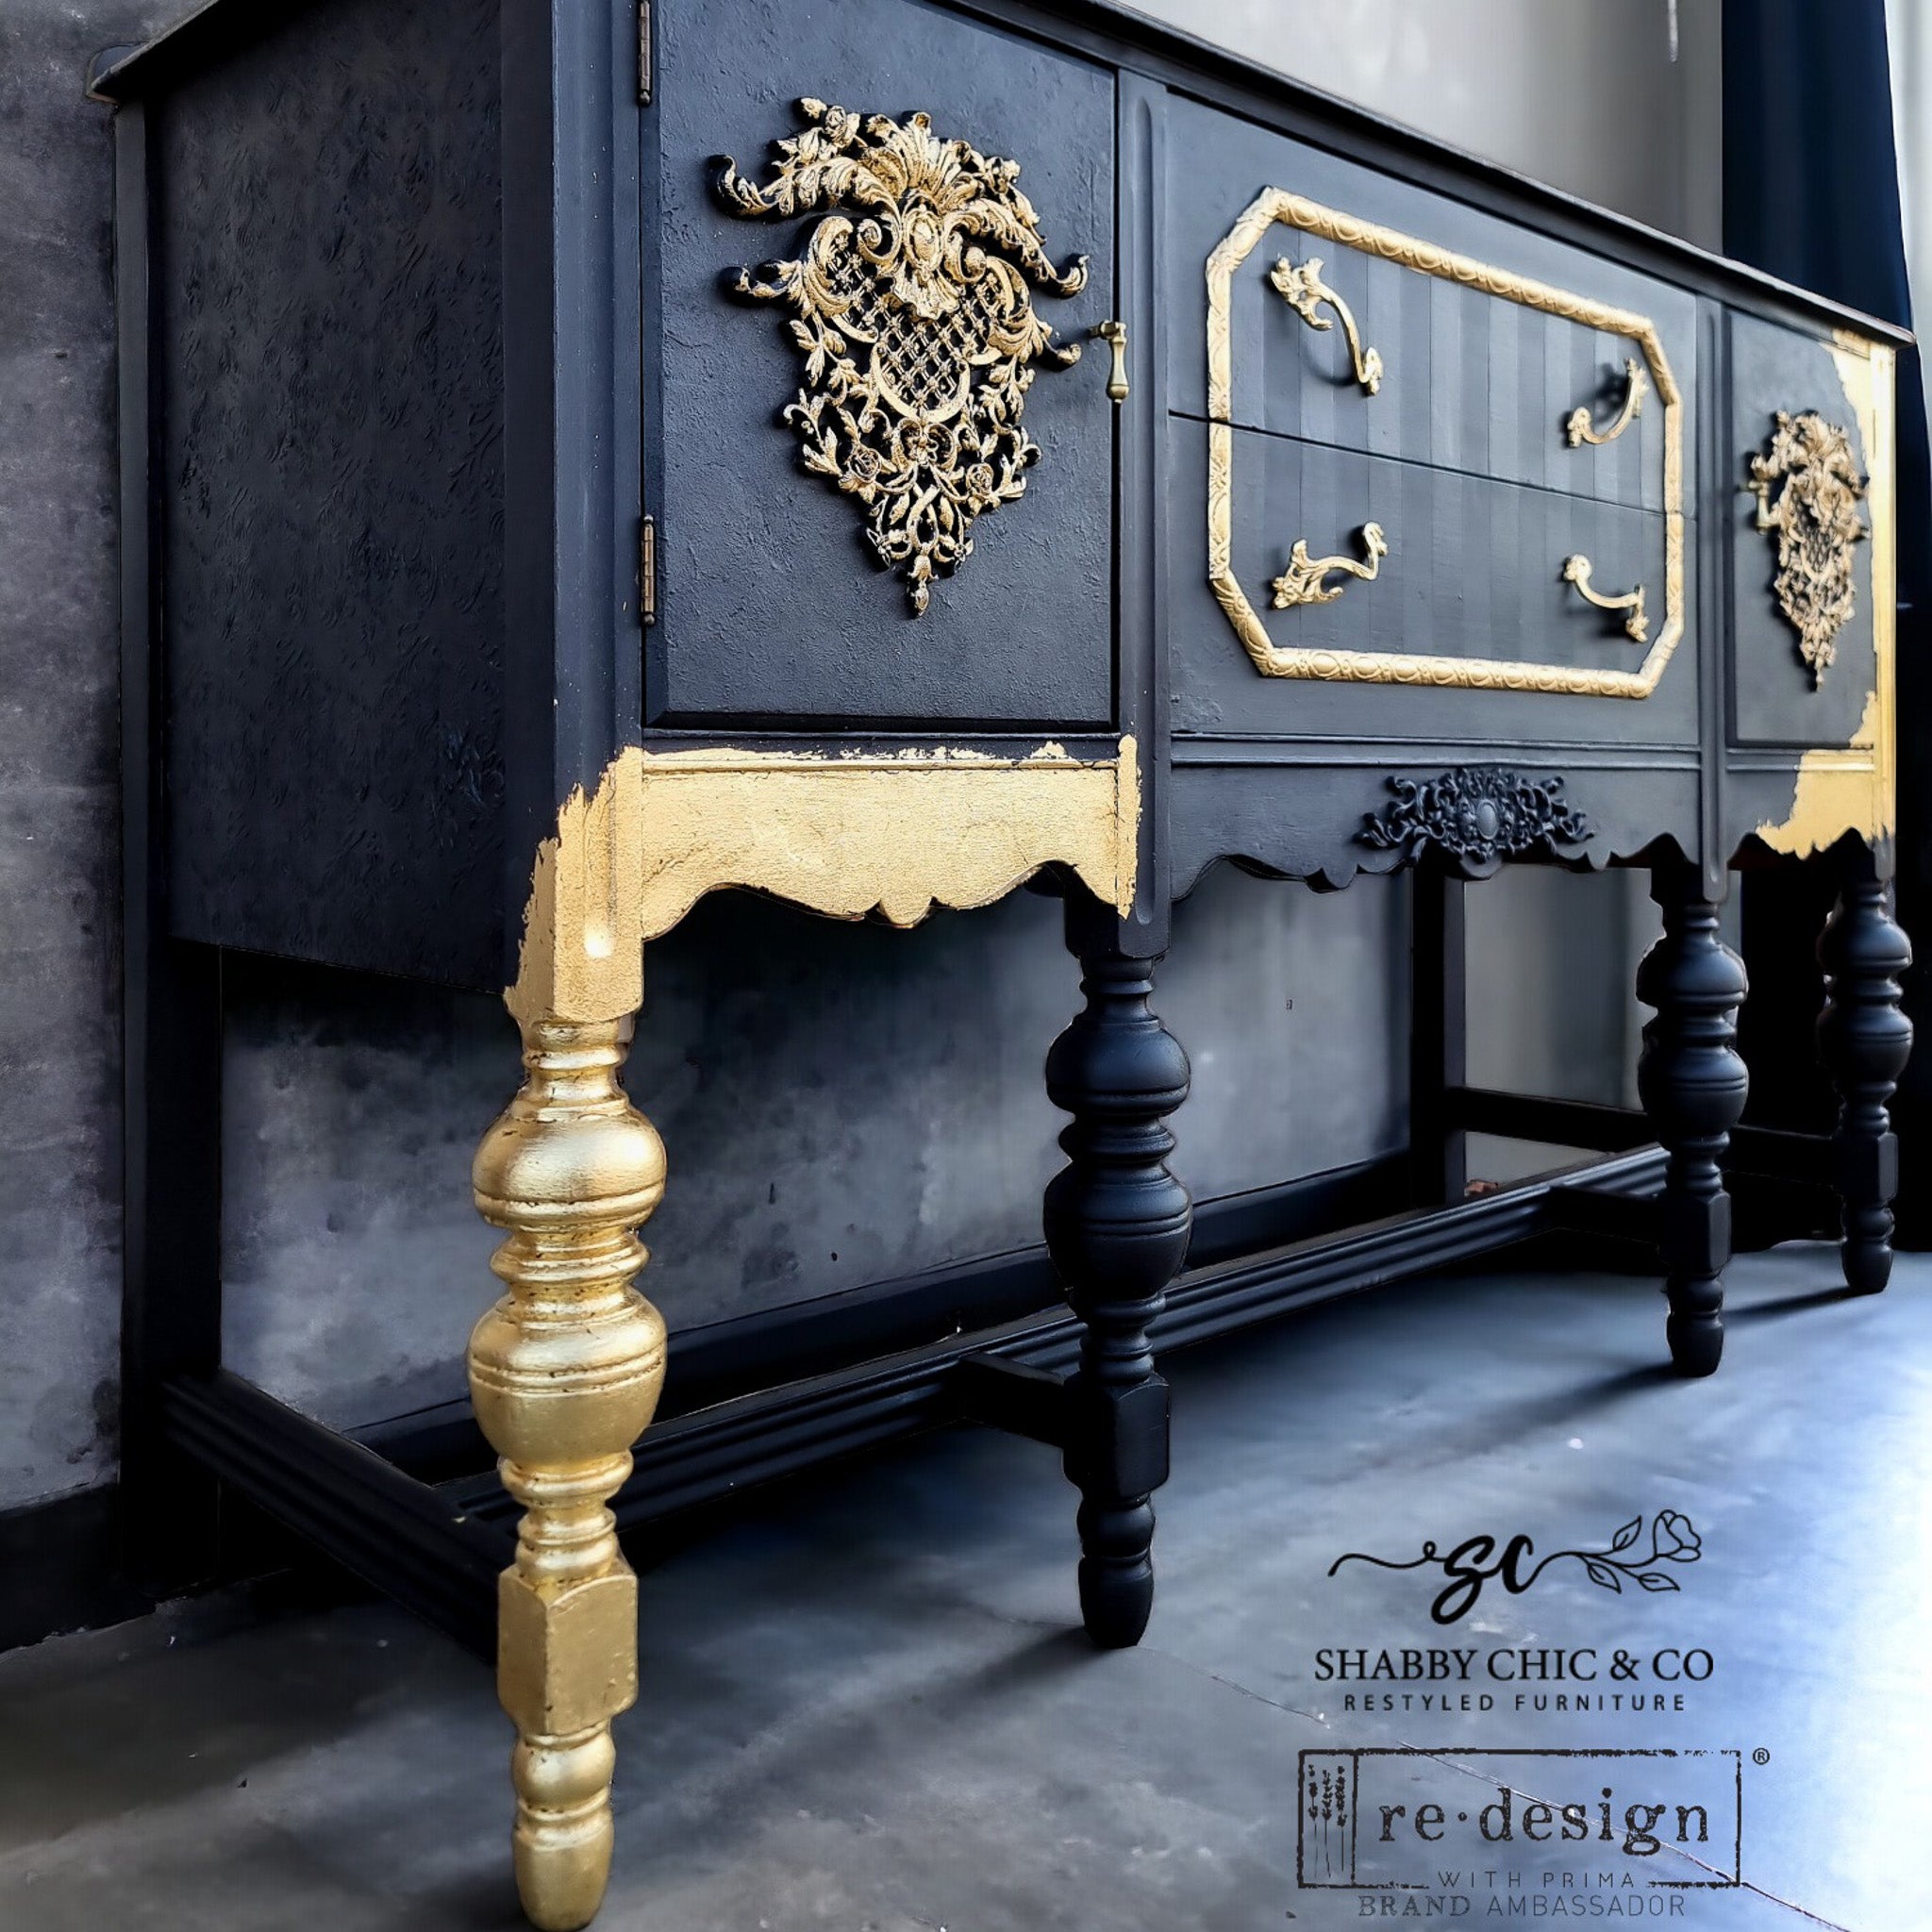 A vintage console table refurbished by Shabby Chic & Company is painted black with gold accents and features ReDesign with Prima's Baroque Elegance Decor Poly painted gold on its 2 doors.